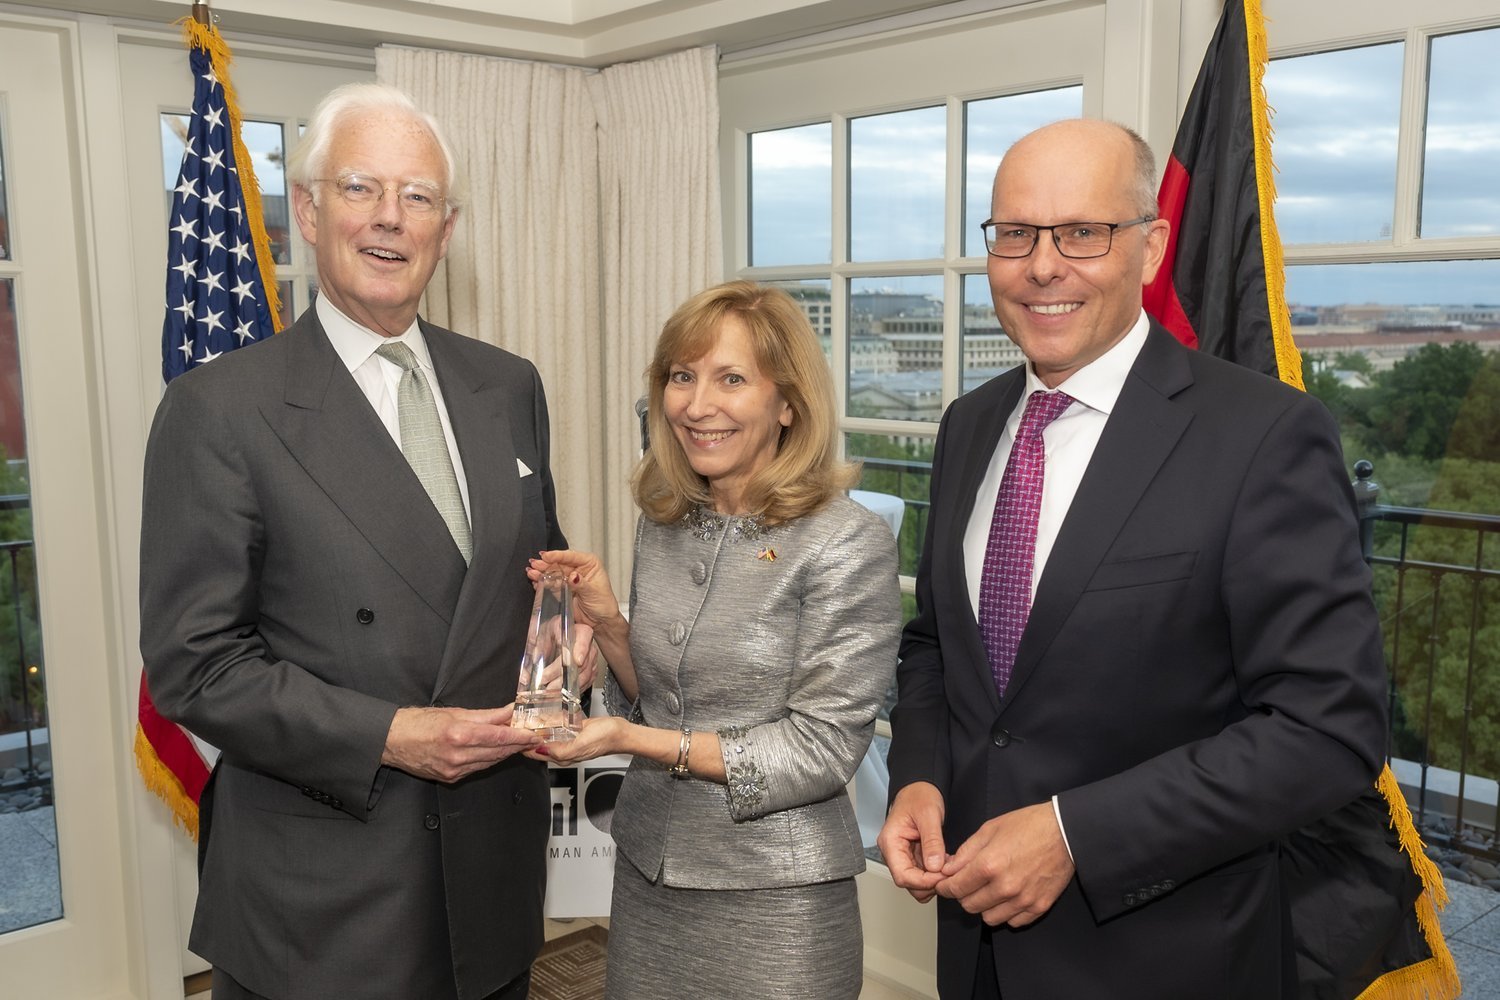  Alan MacDonald (Citigroup, Vice-Chairman of Citibank; Chairman of Corporate Banking and Chief Client Officer of Citi), left, accepts 2020 Leadership Award on behalf of Citi. On right, Peter Beyer, MP, in center, Anna Schneider (Volkswagen, Senior Vi